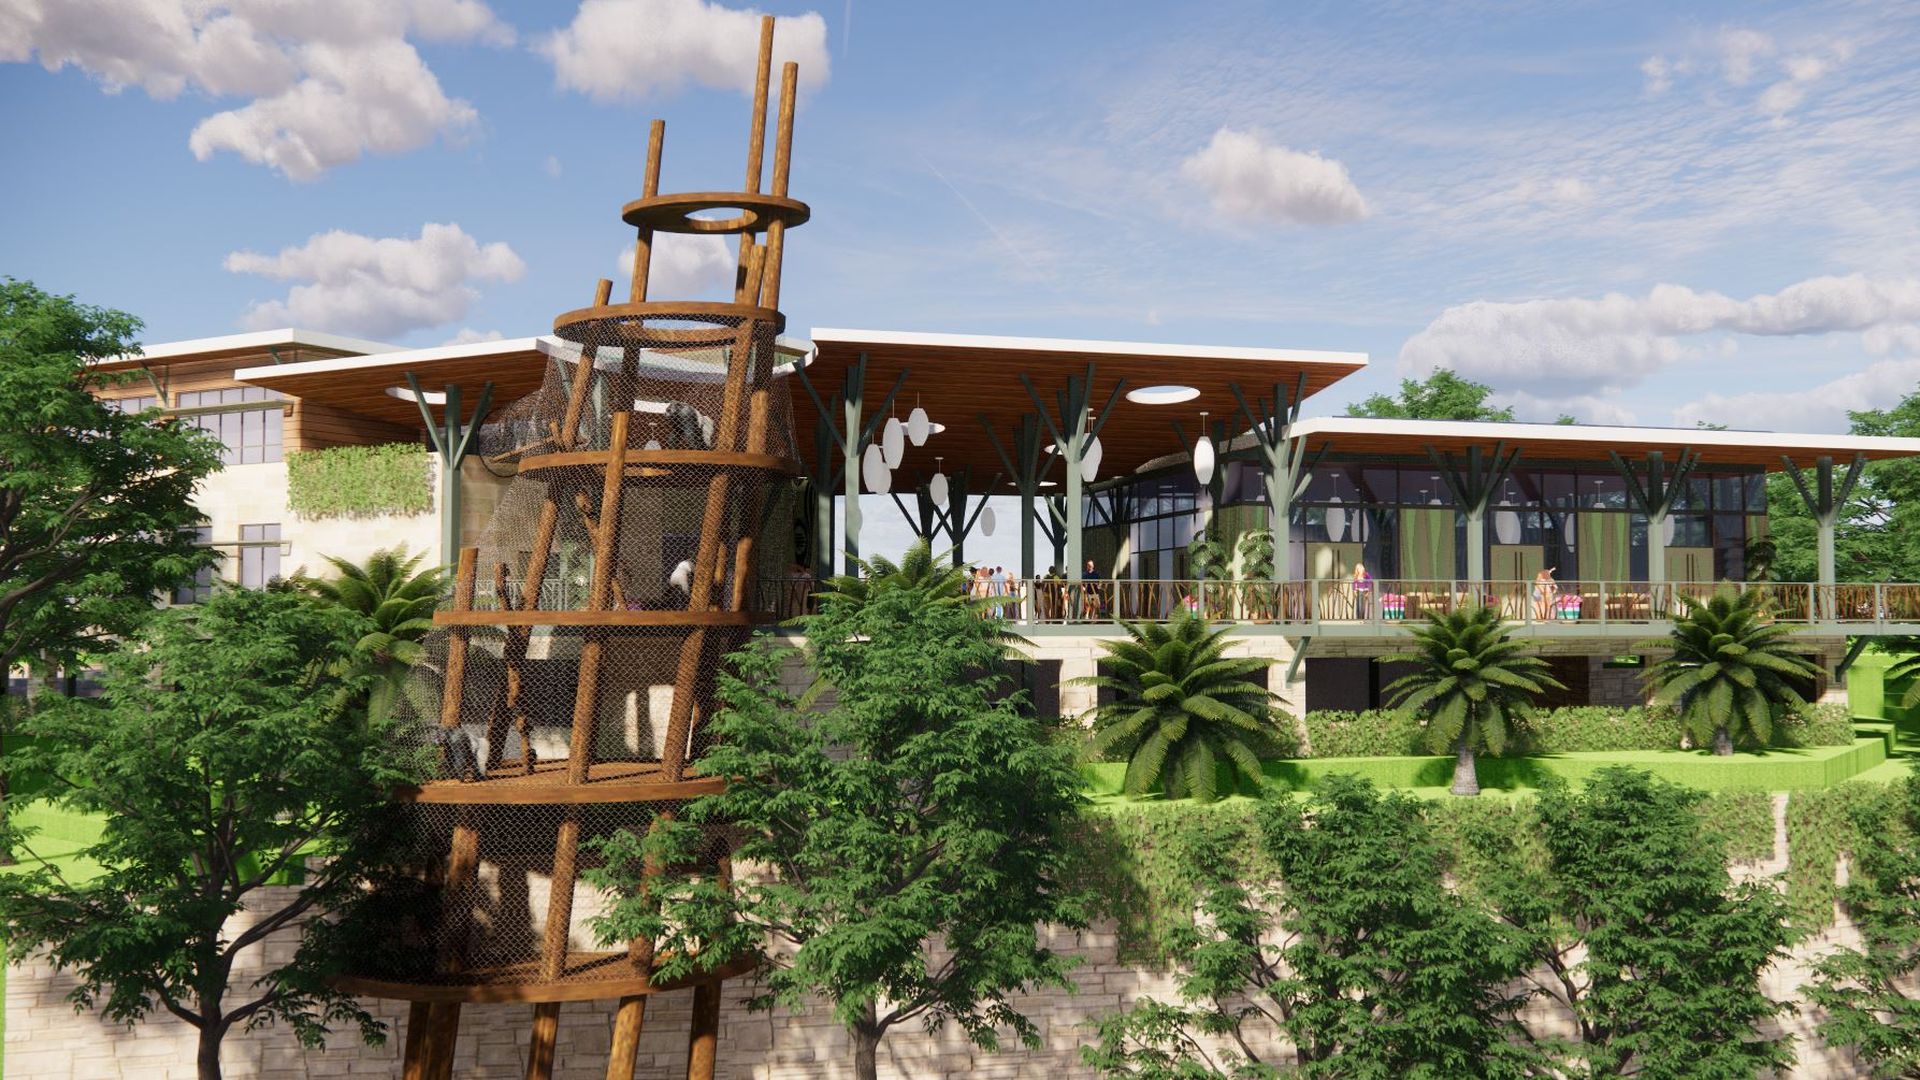 Rendering of the upcoming private event center at the zoo, which features a tower-like habitat for gorillas. 